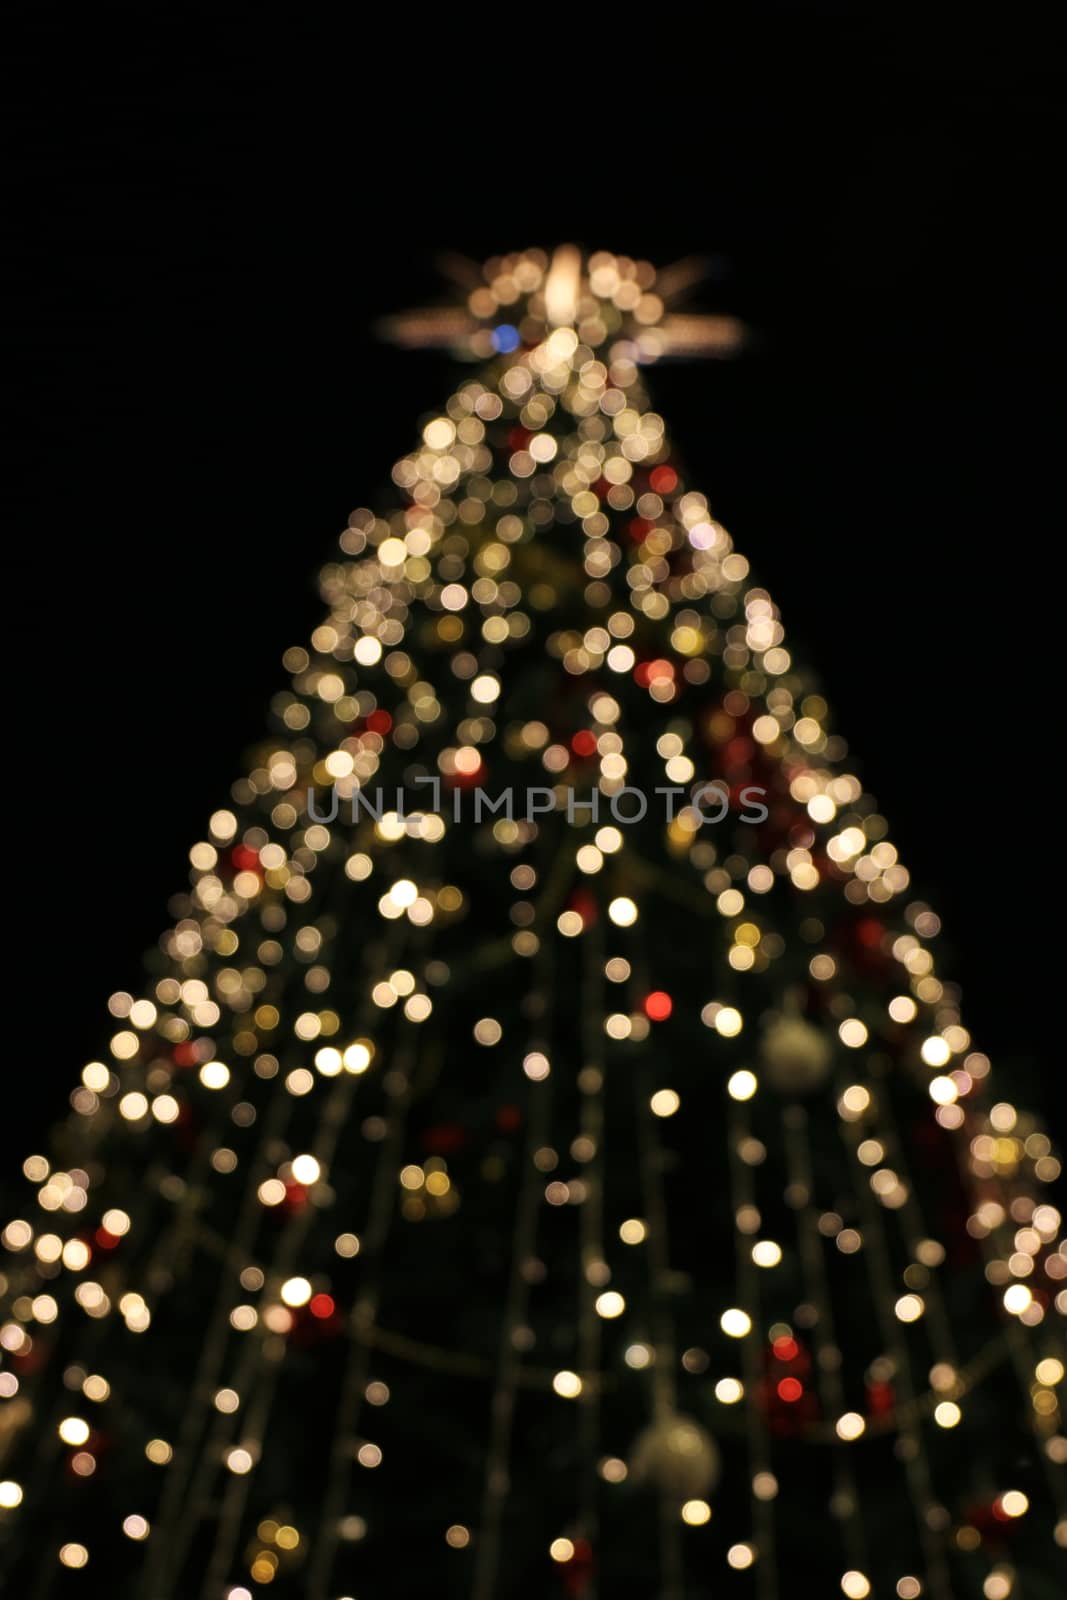 Blurred Christmas tree decoration background with night lights, Christmas holiday celebration, Christmas trees, a new European winter